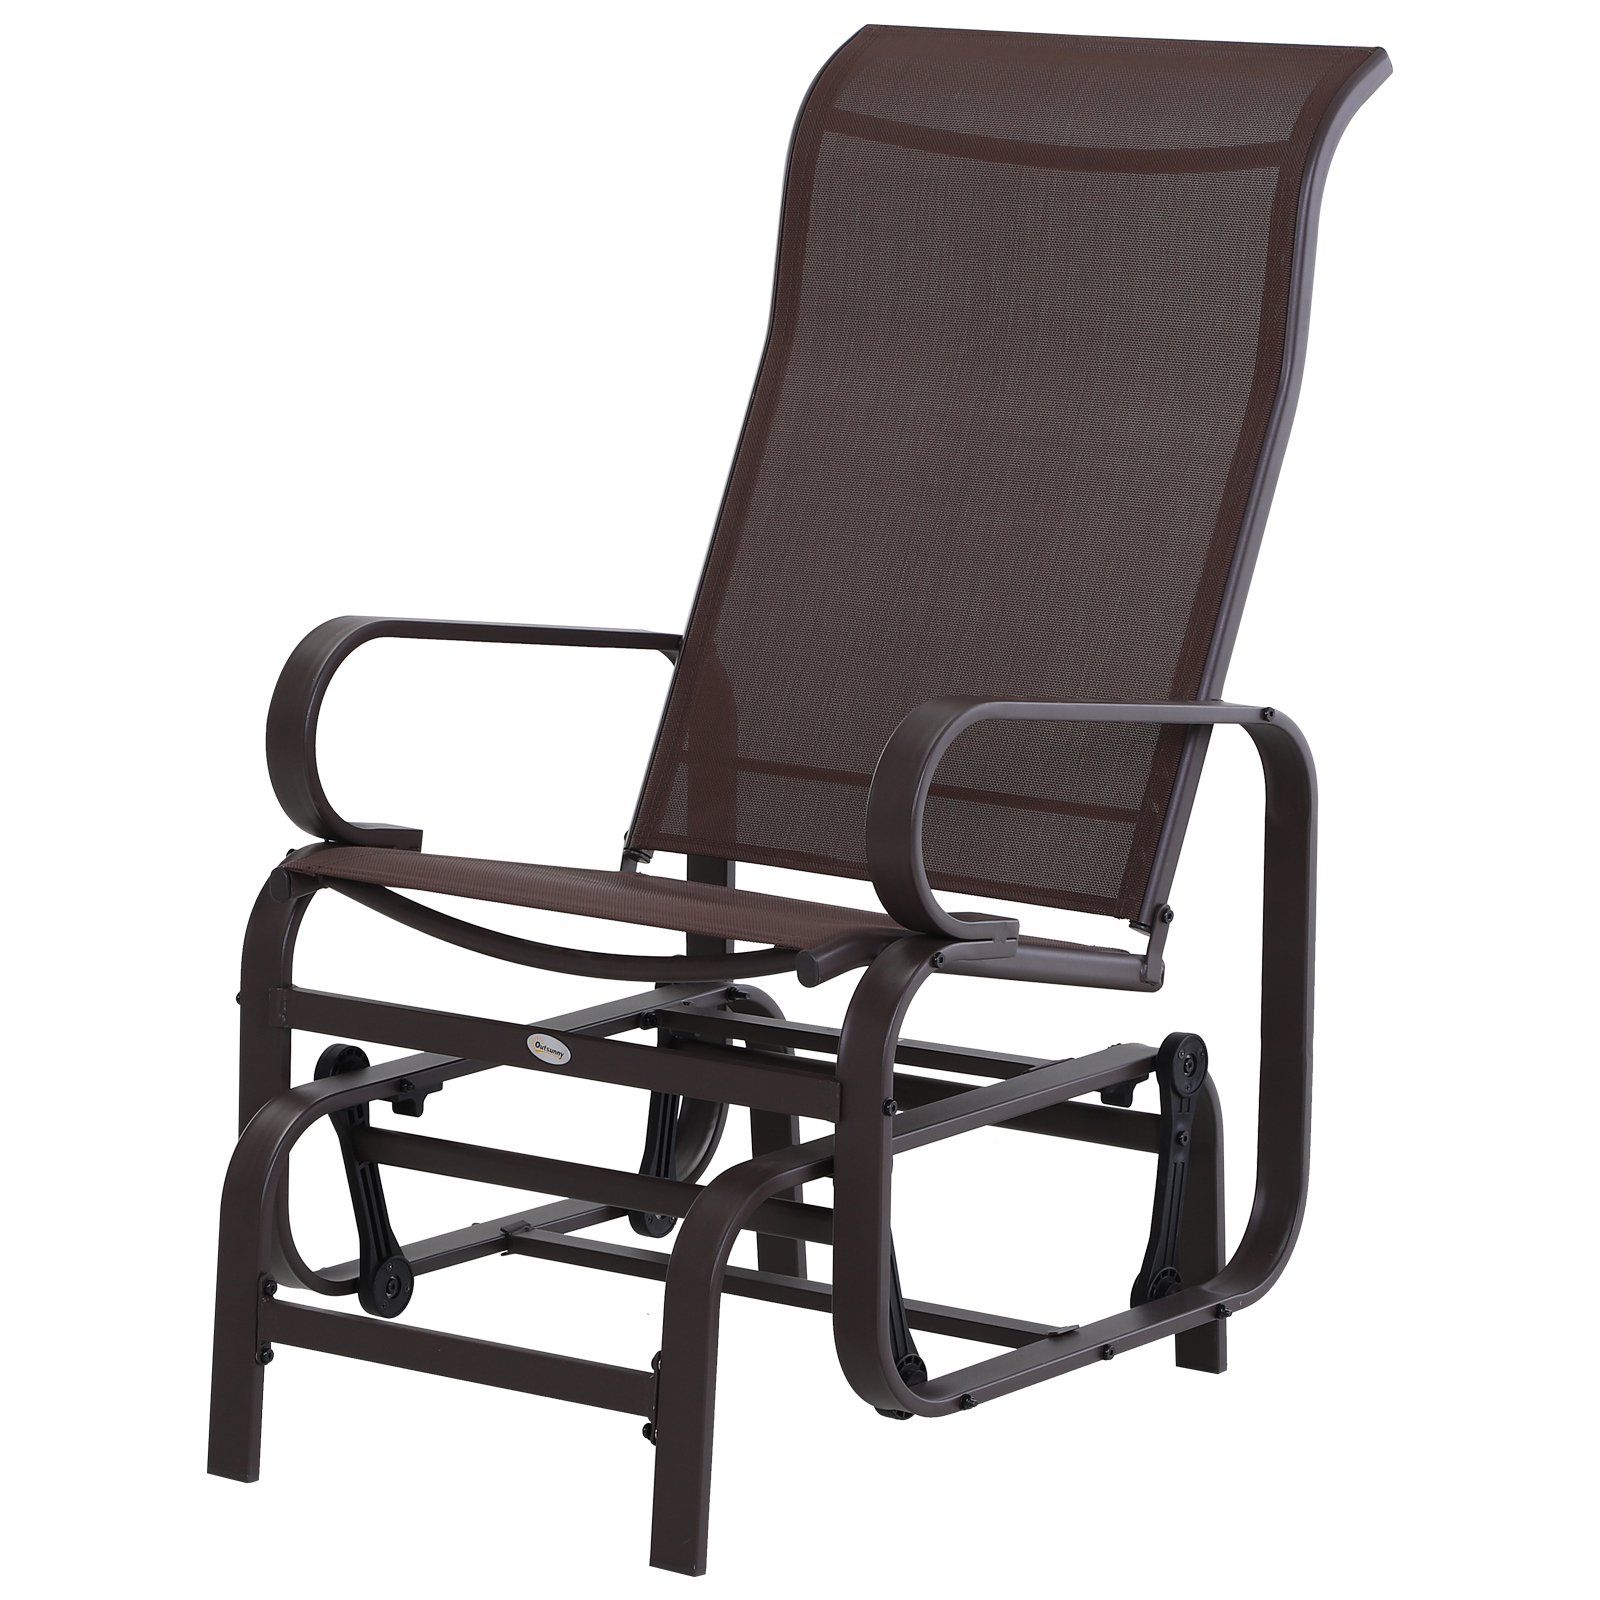 Gliding Lounge Rocker for Indoor/Outdoor Use w/ Water-Resistant Material - Brown